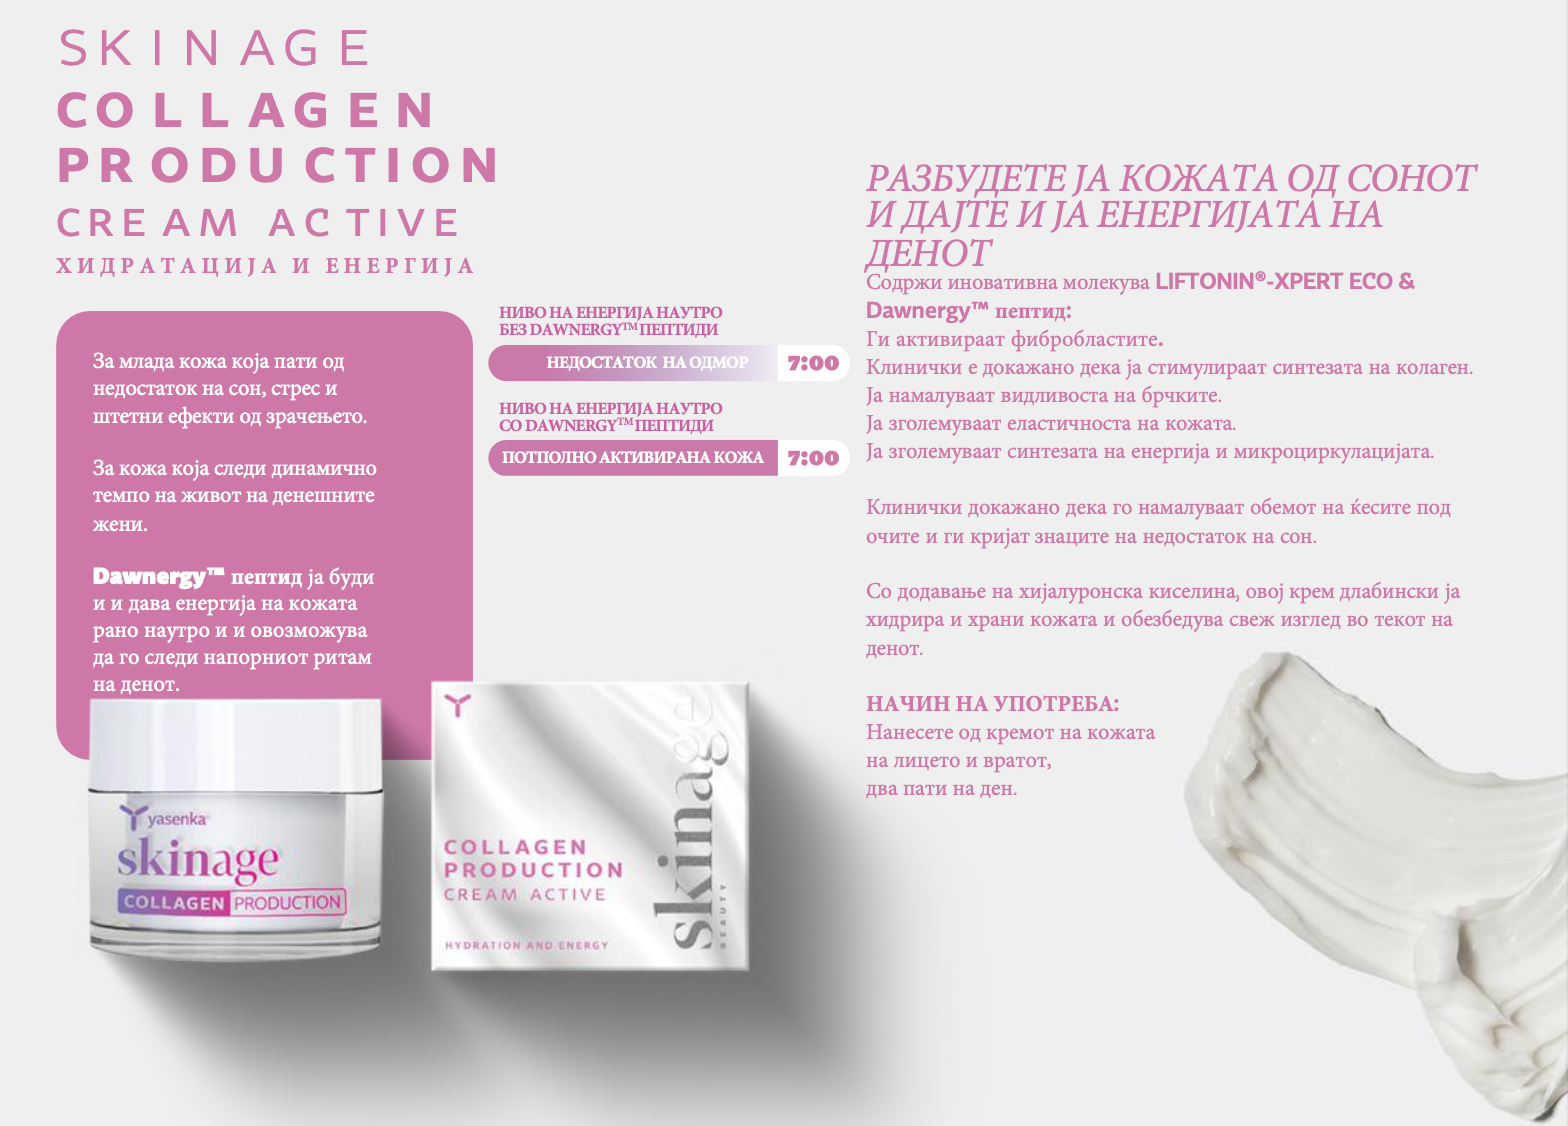 SKINAGE COLLAGEN PRODUCTION CREAM ACTIVE